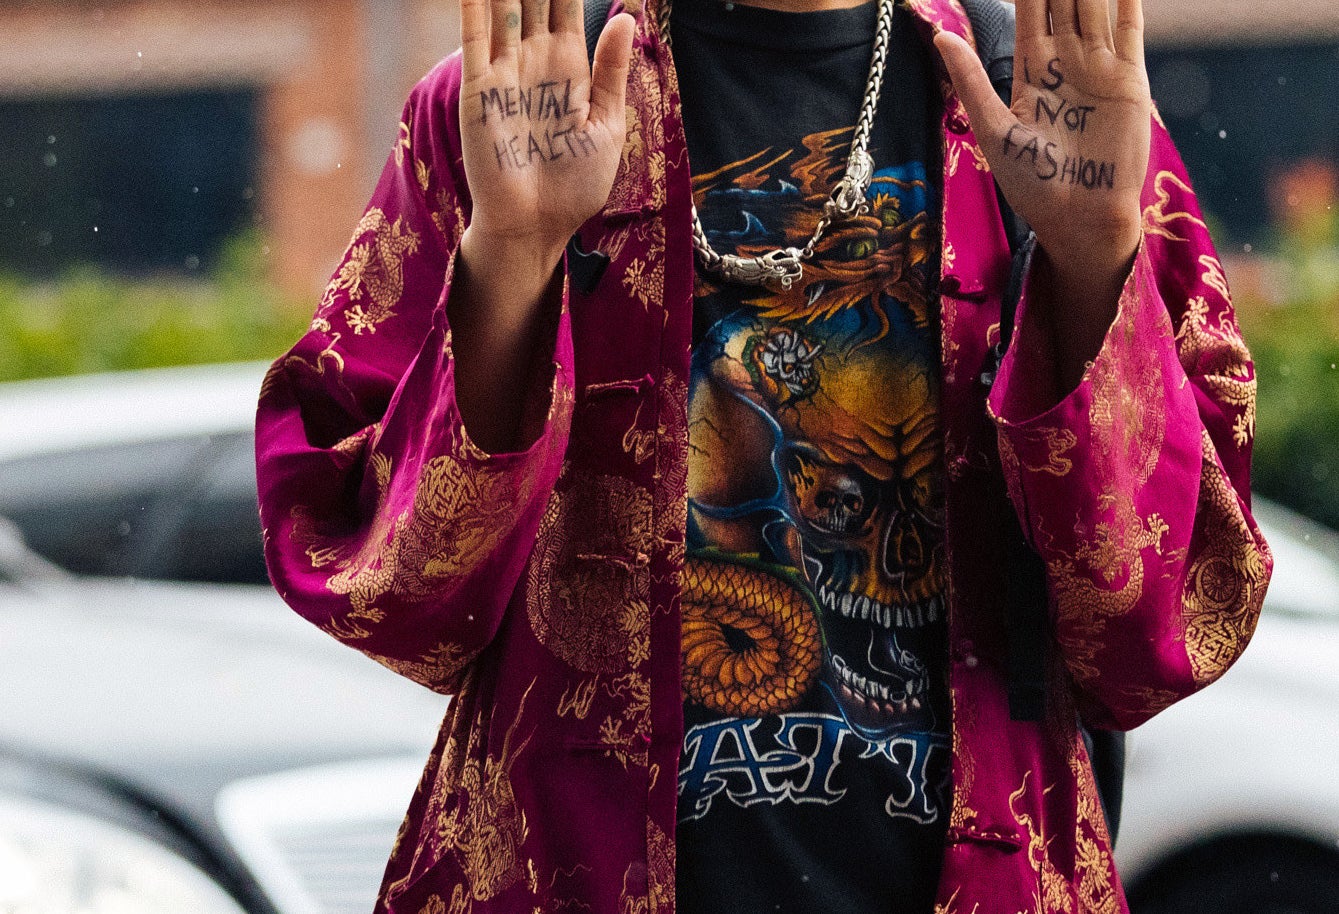 Close-up of the message &quot;Mental health is not fashion&quot; on their palms